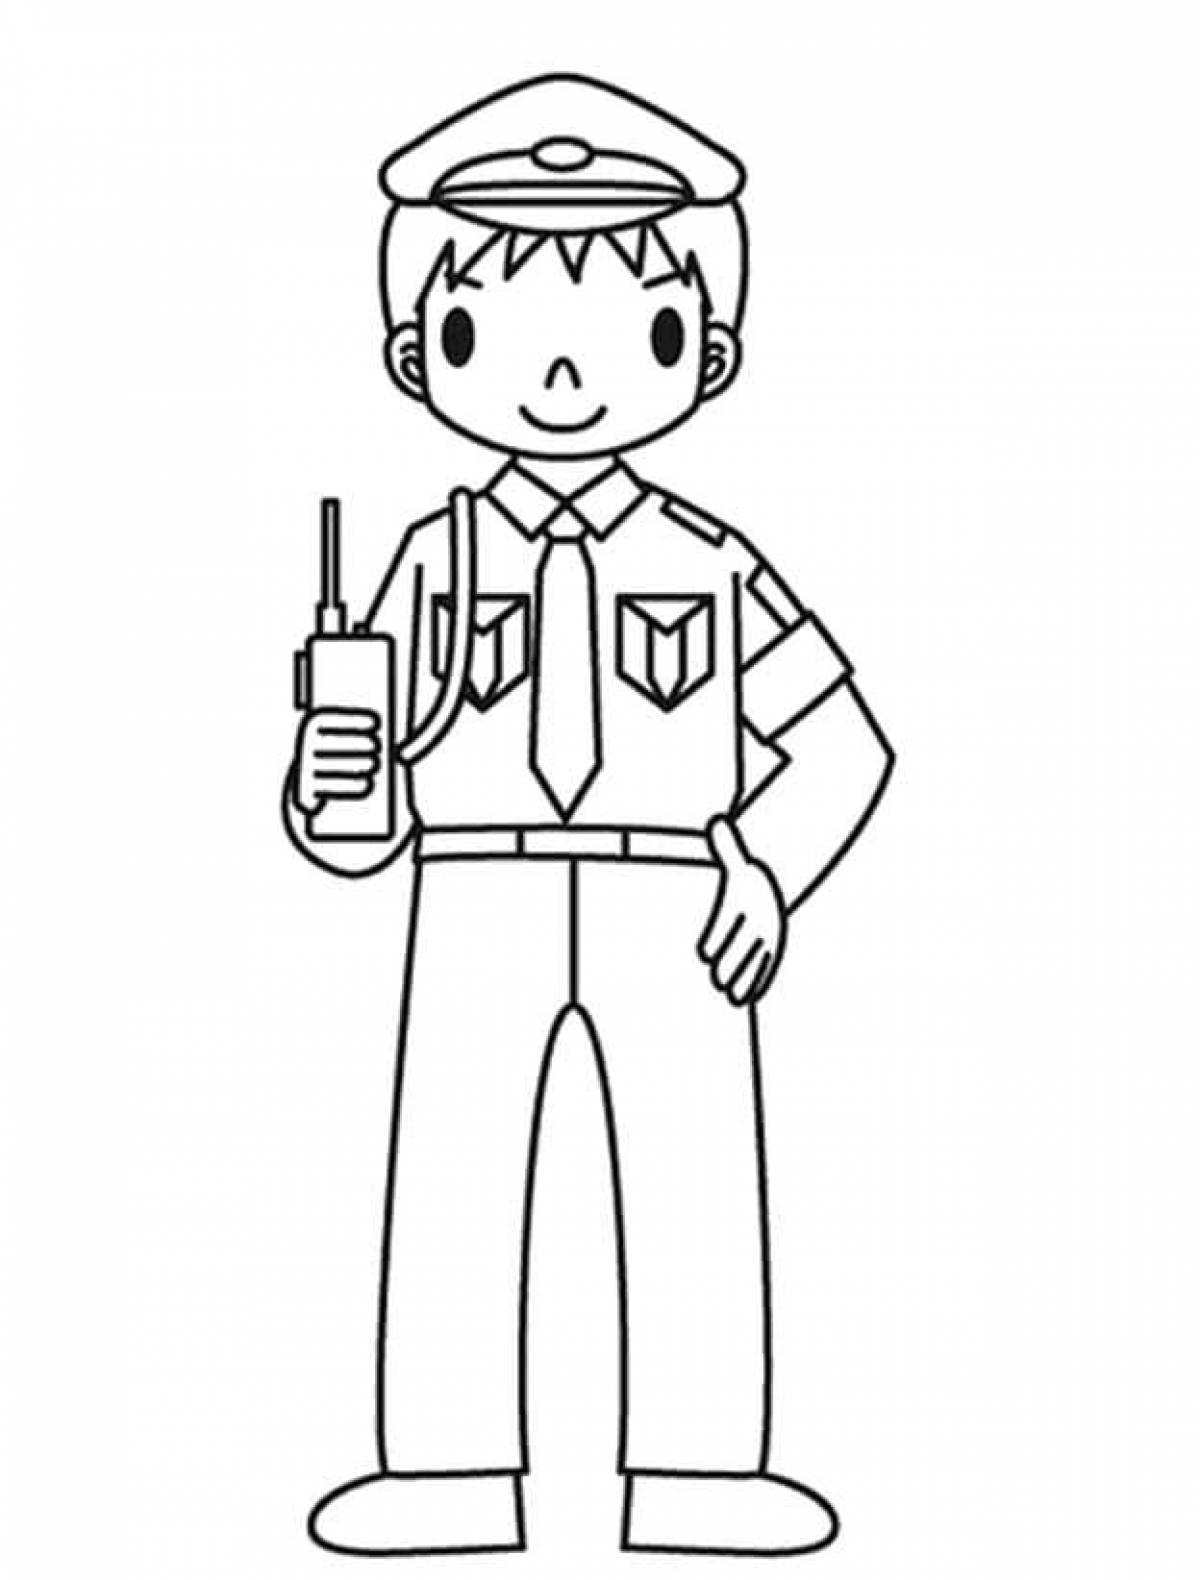 Cop coloring page for kids